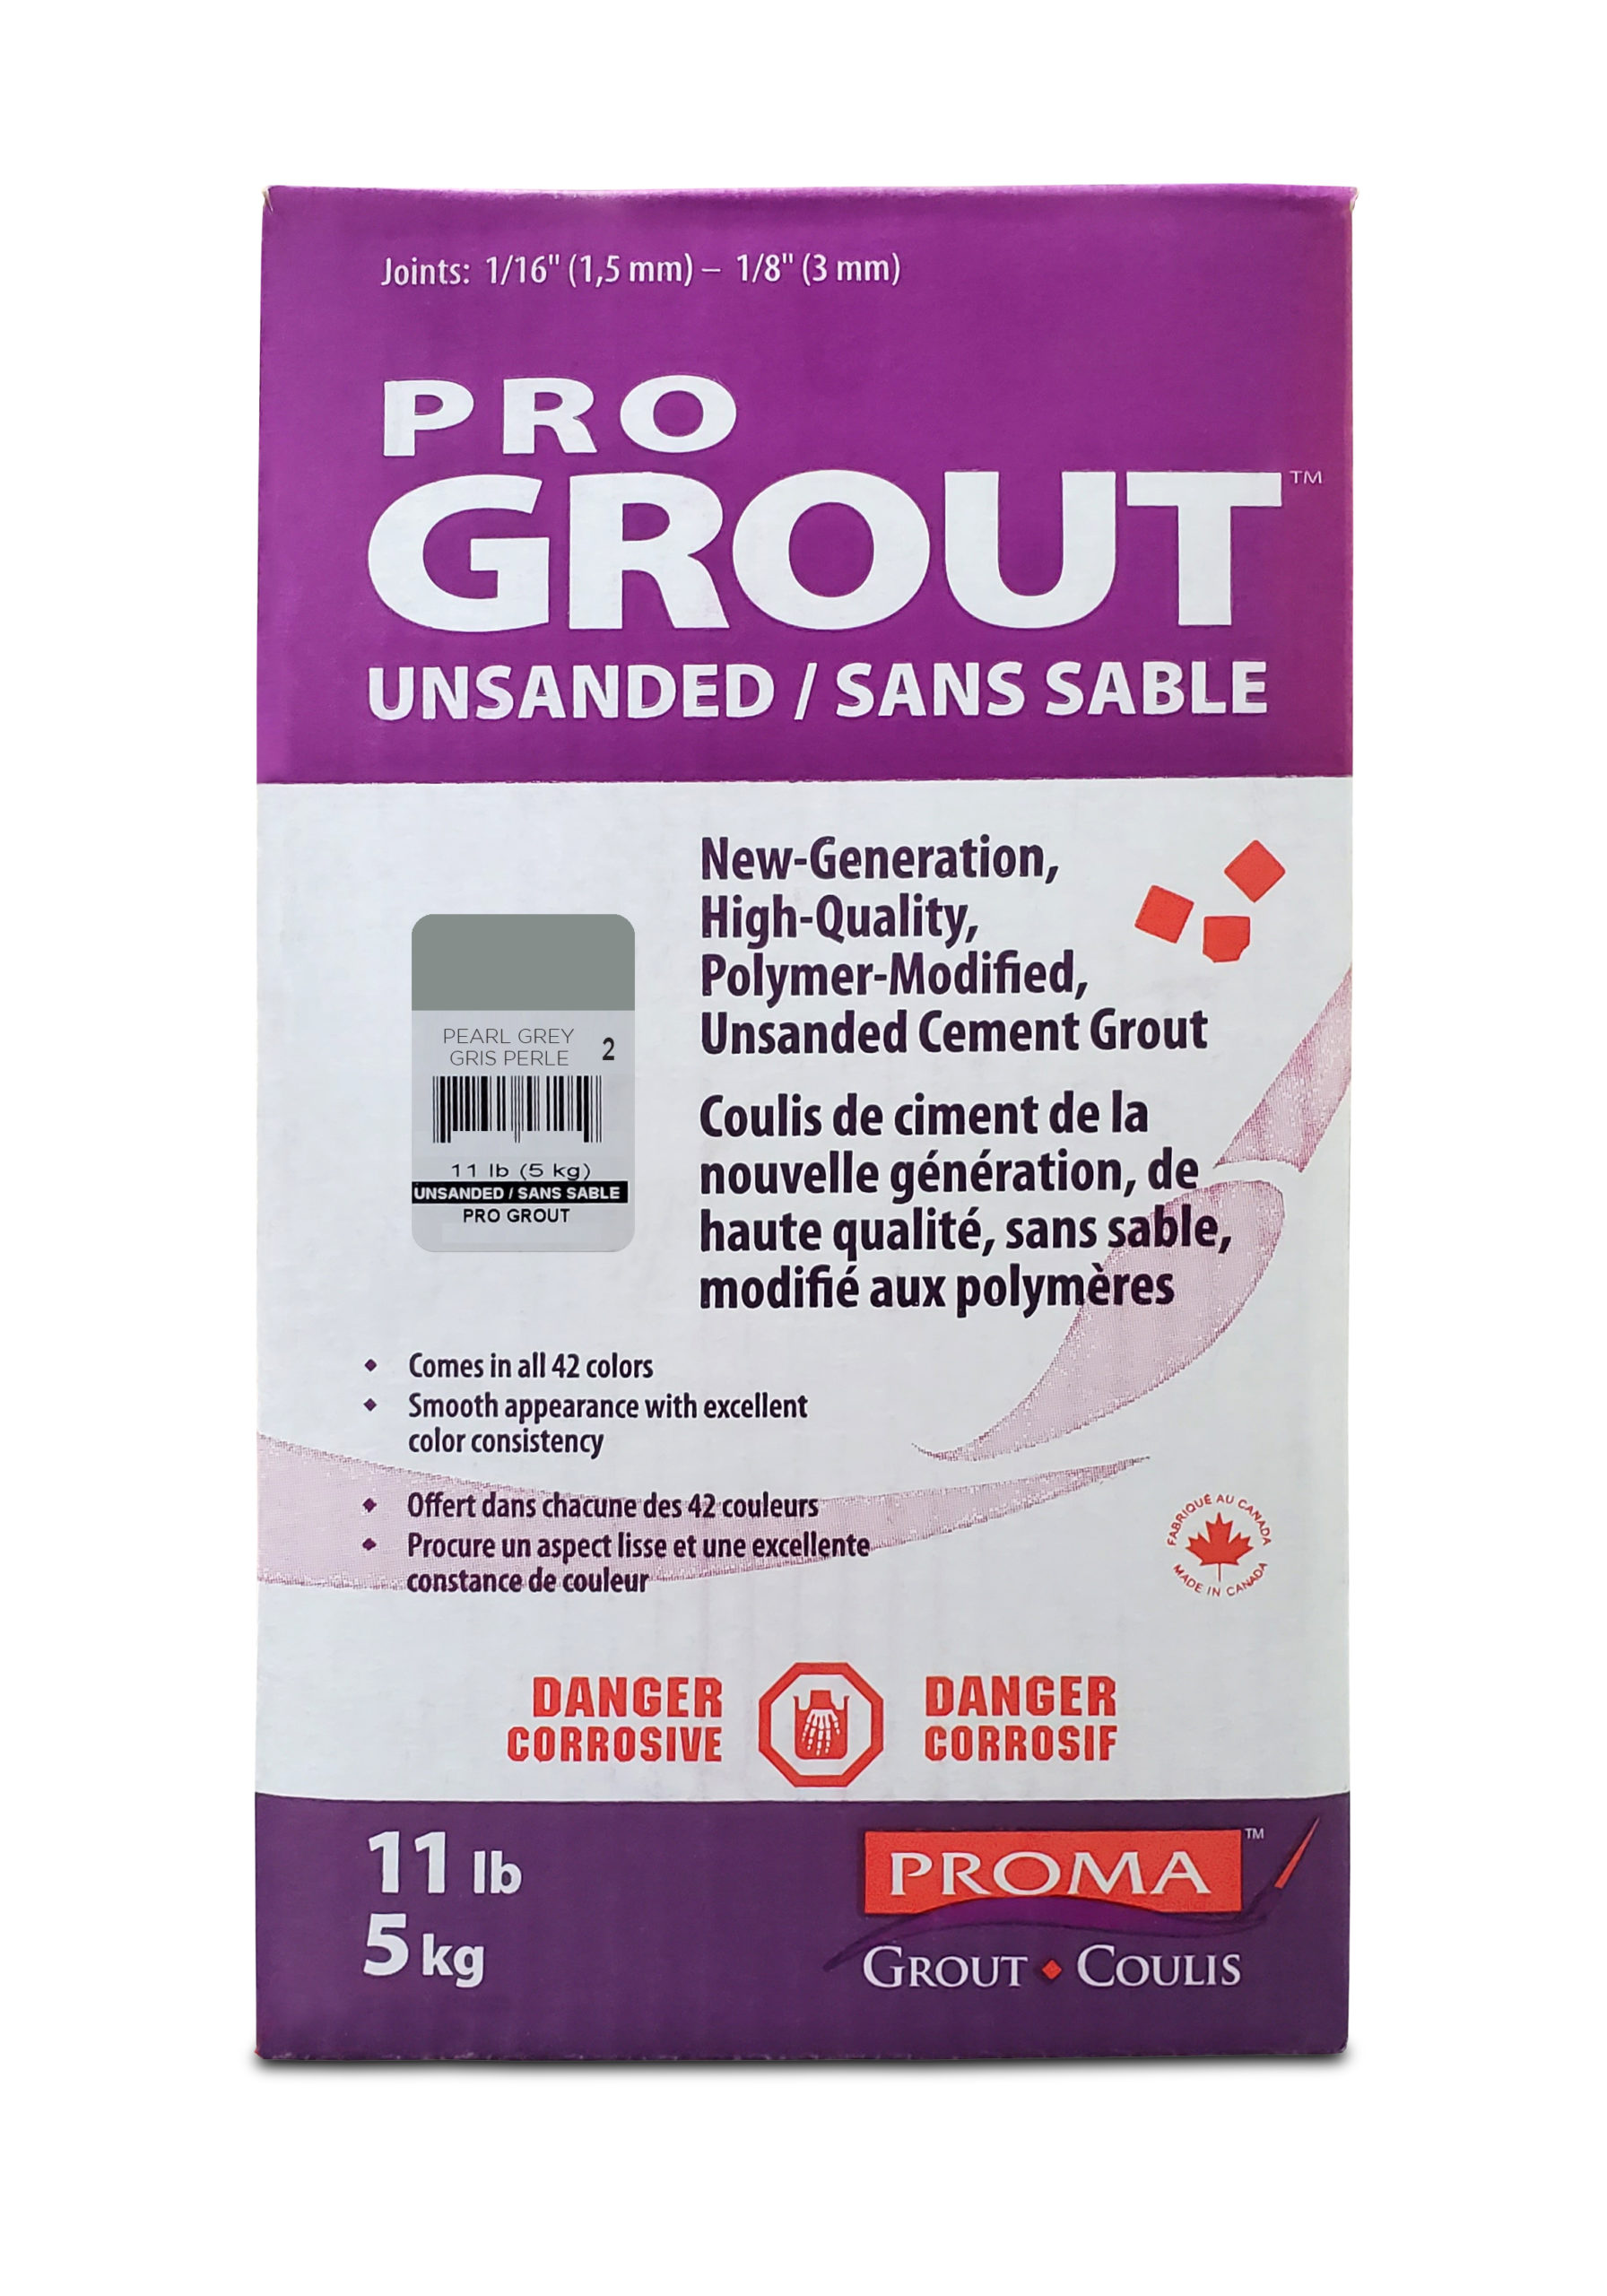 Pro Grout – Unsanded_Pearl Grey_5kg_11lb